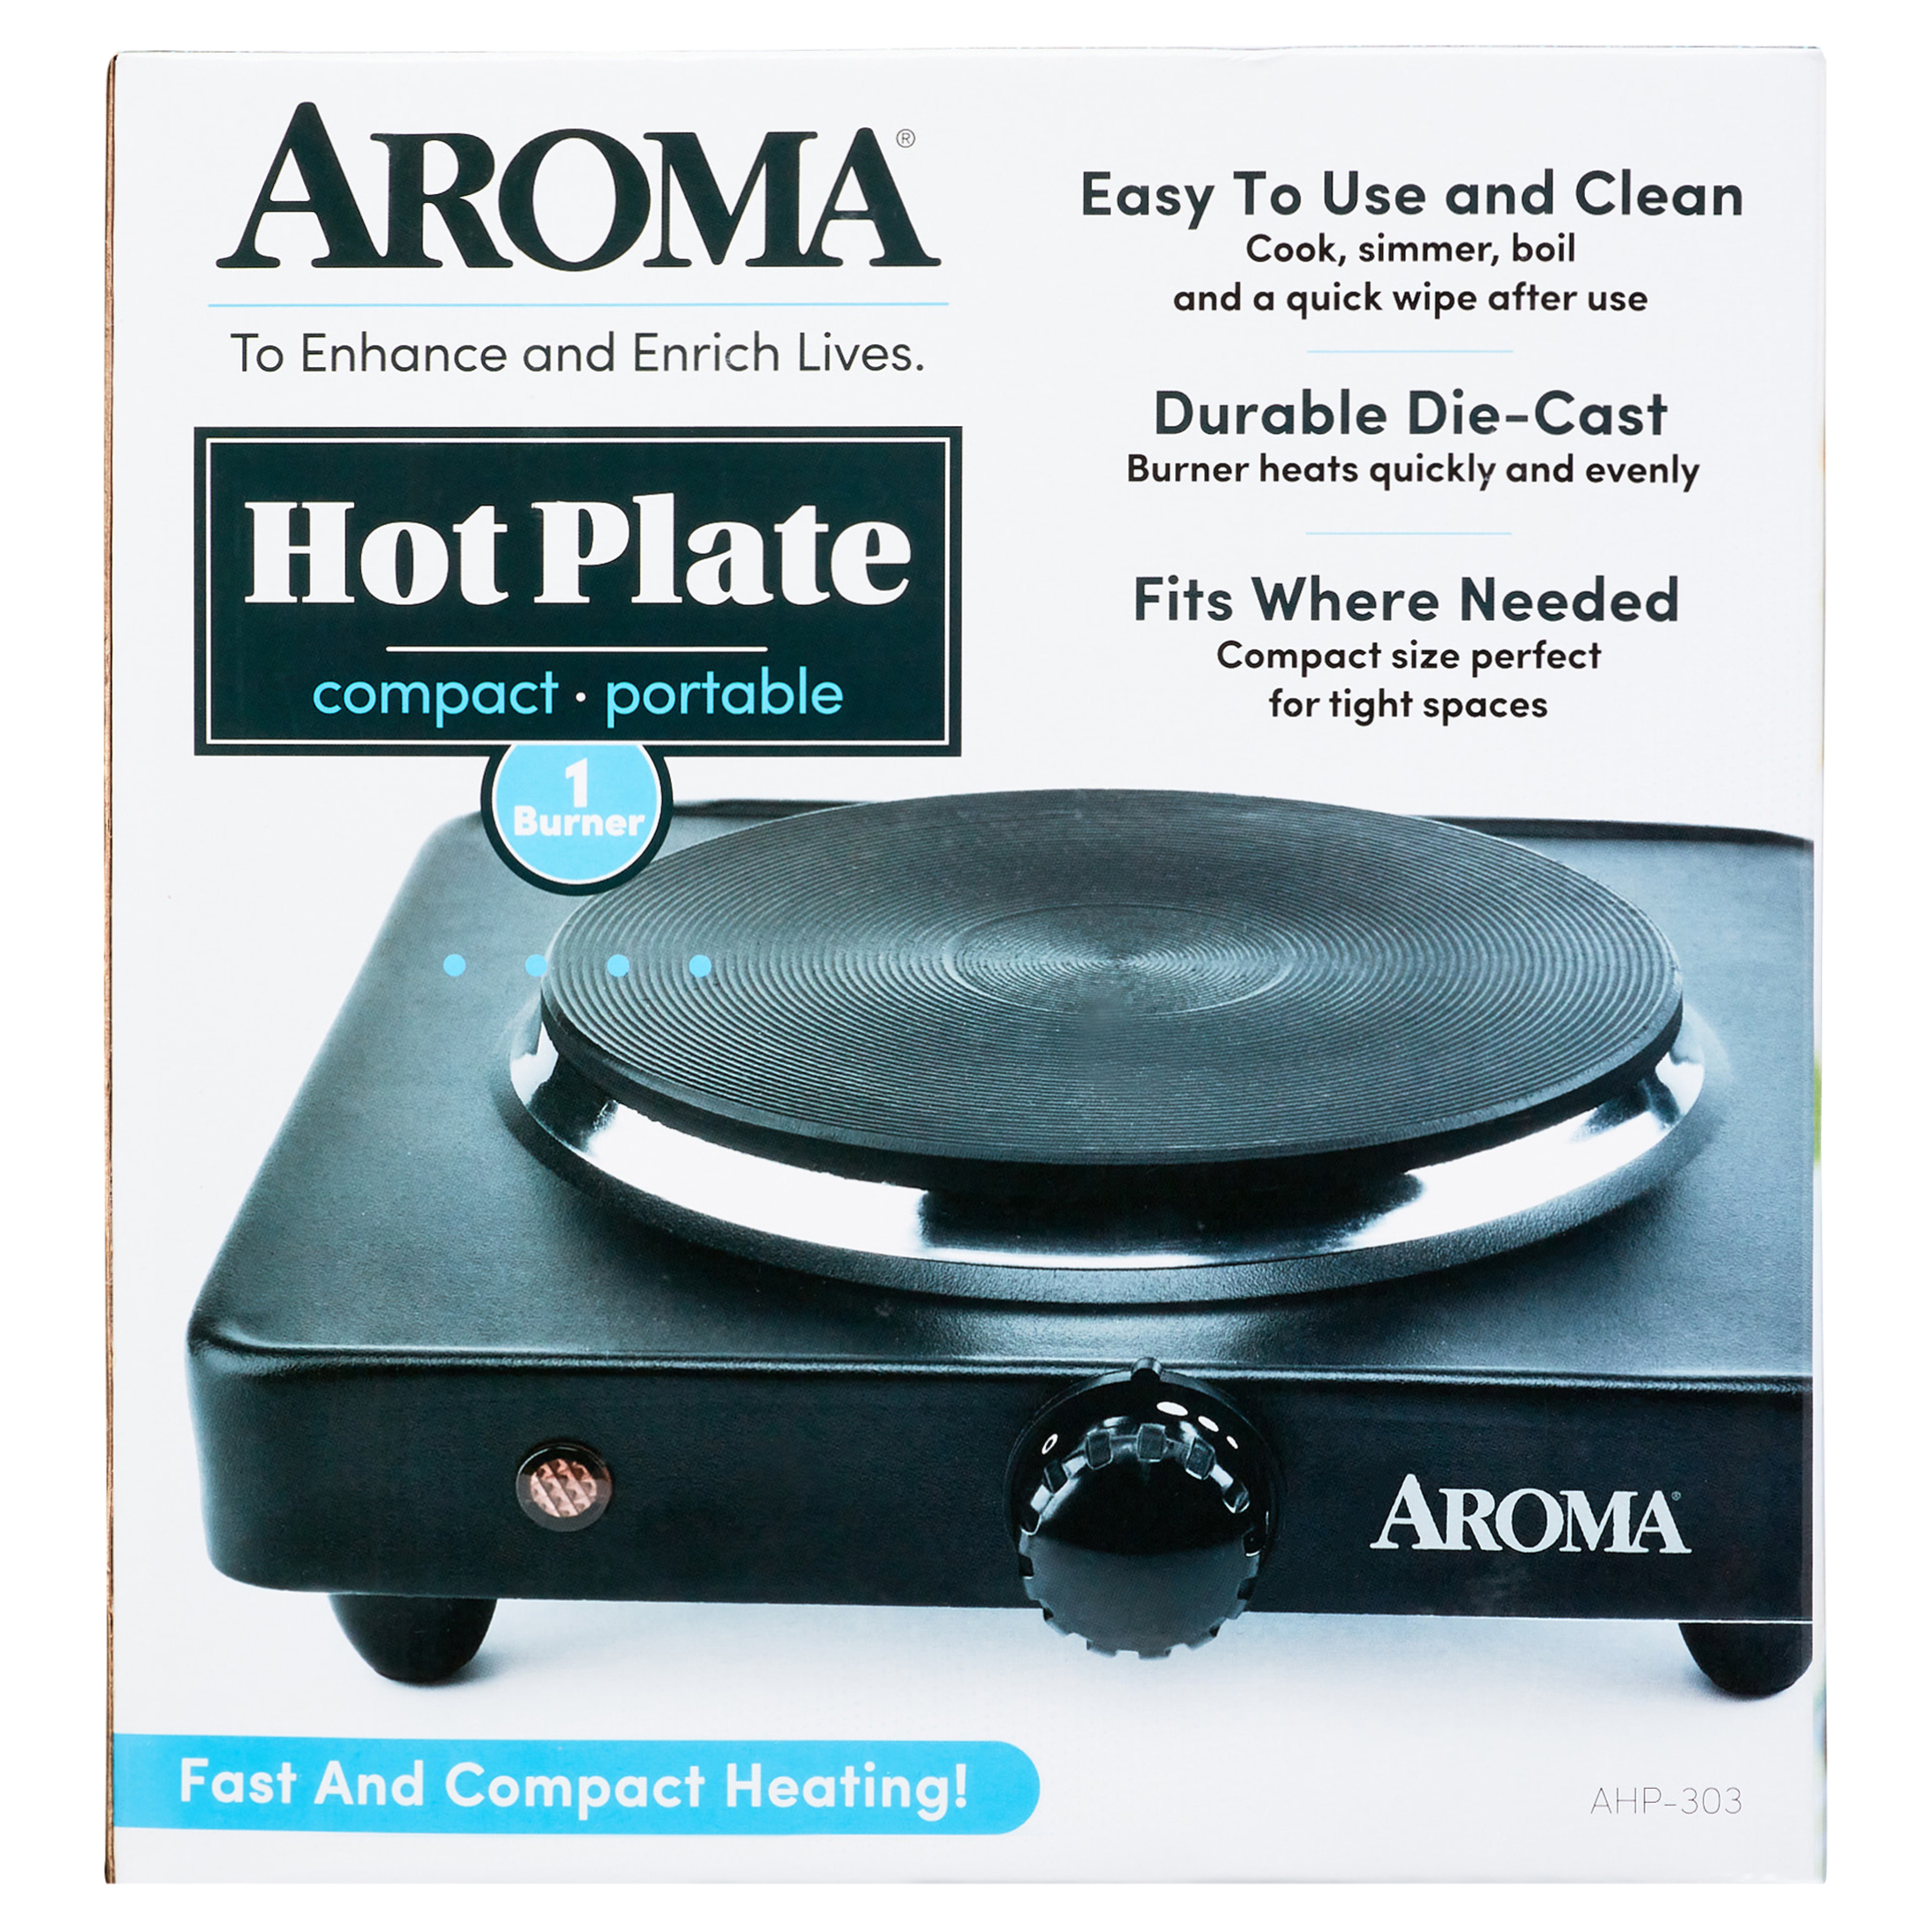 Aroma® 6" Electric Single Burner Die-Cast Hot Plate, Black, New - image 2 of 10